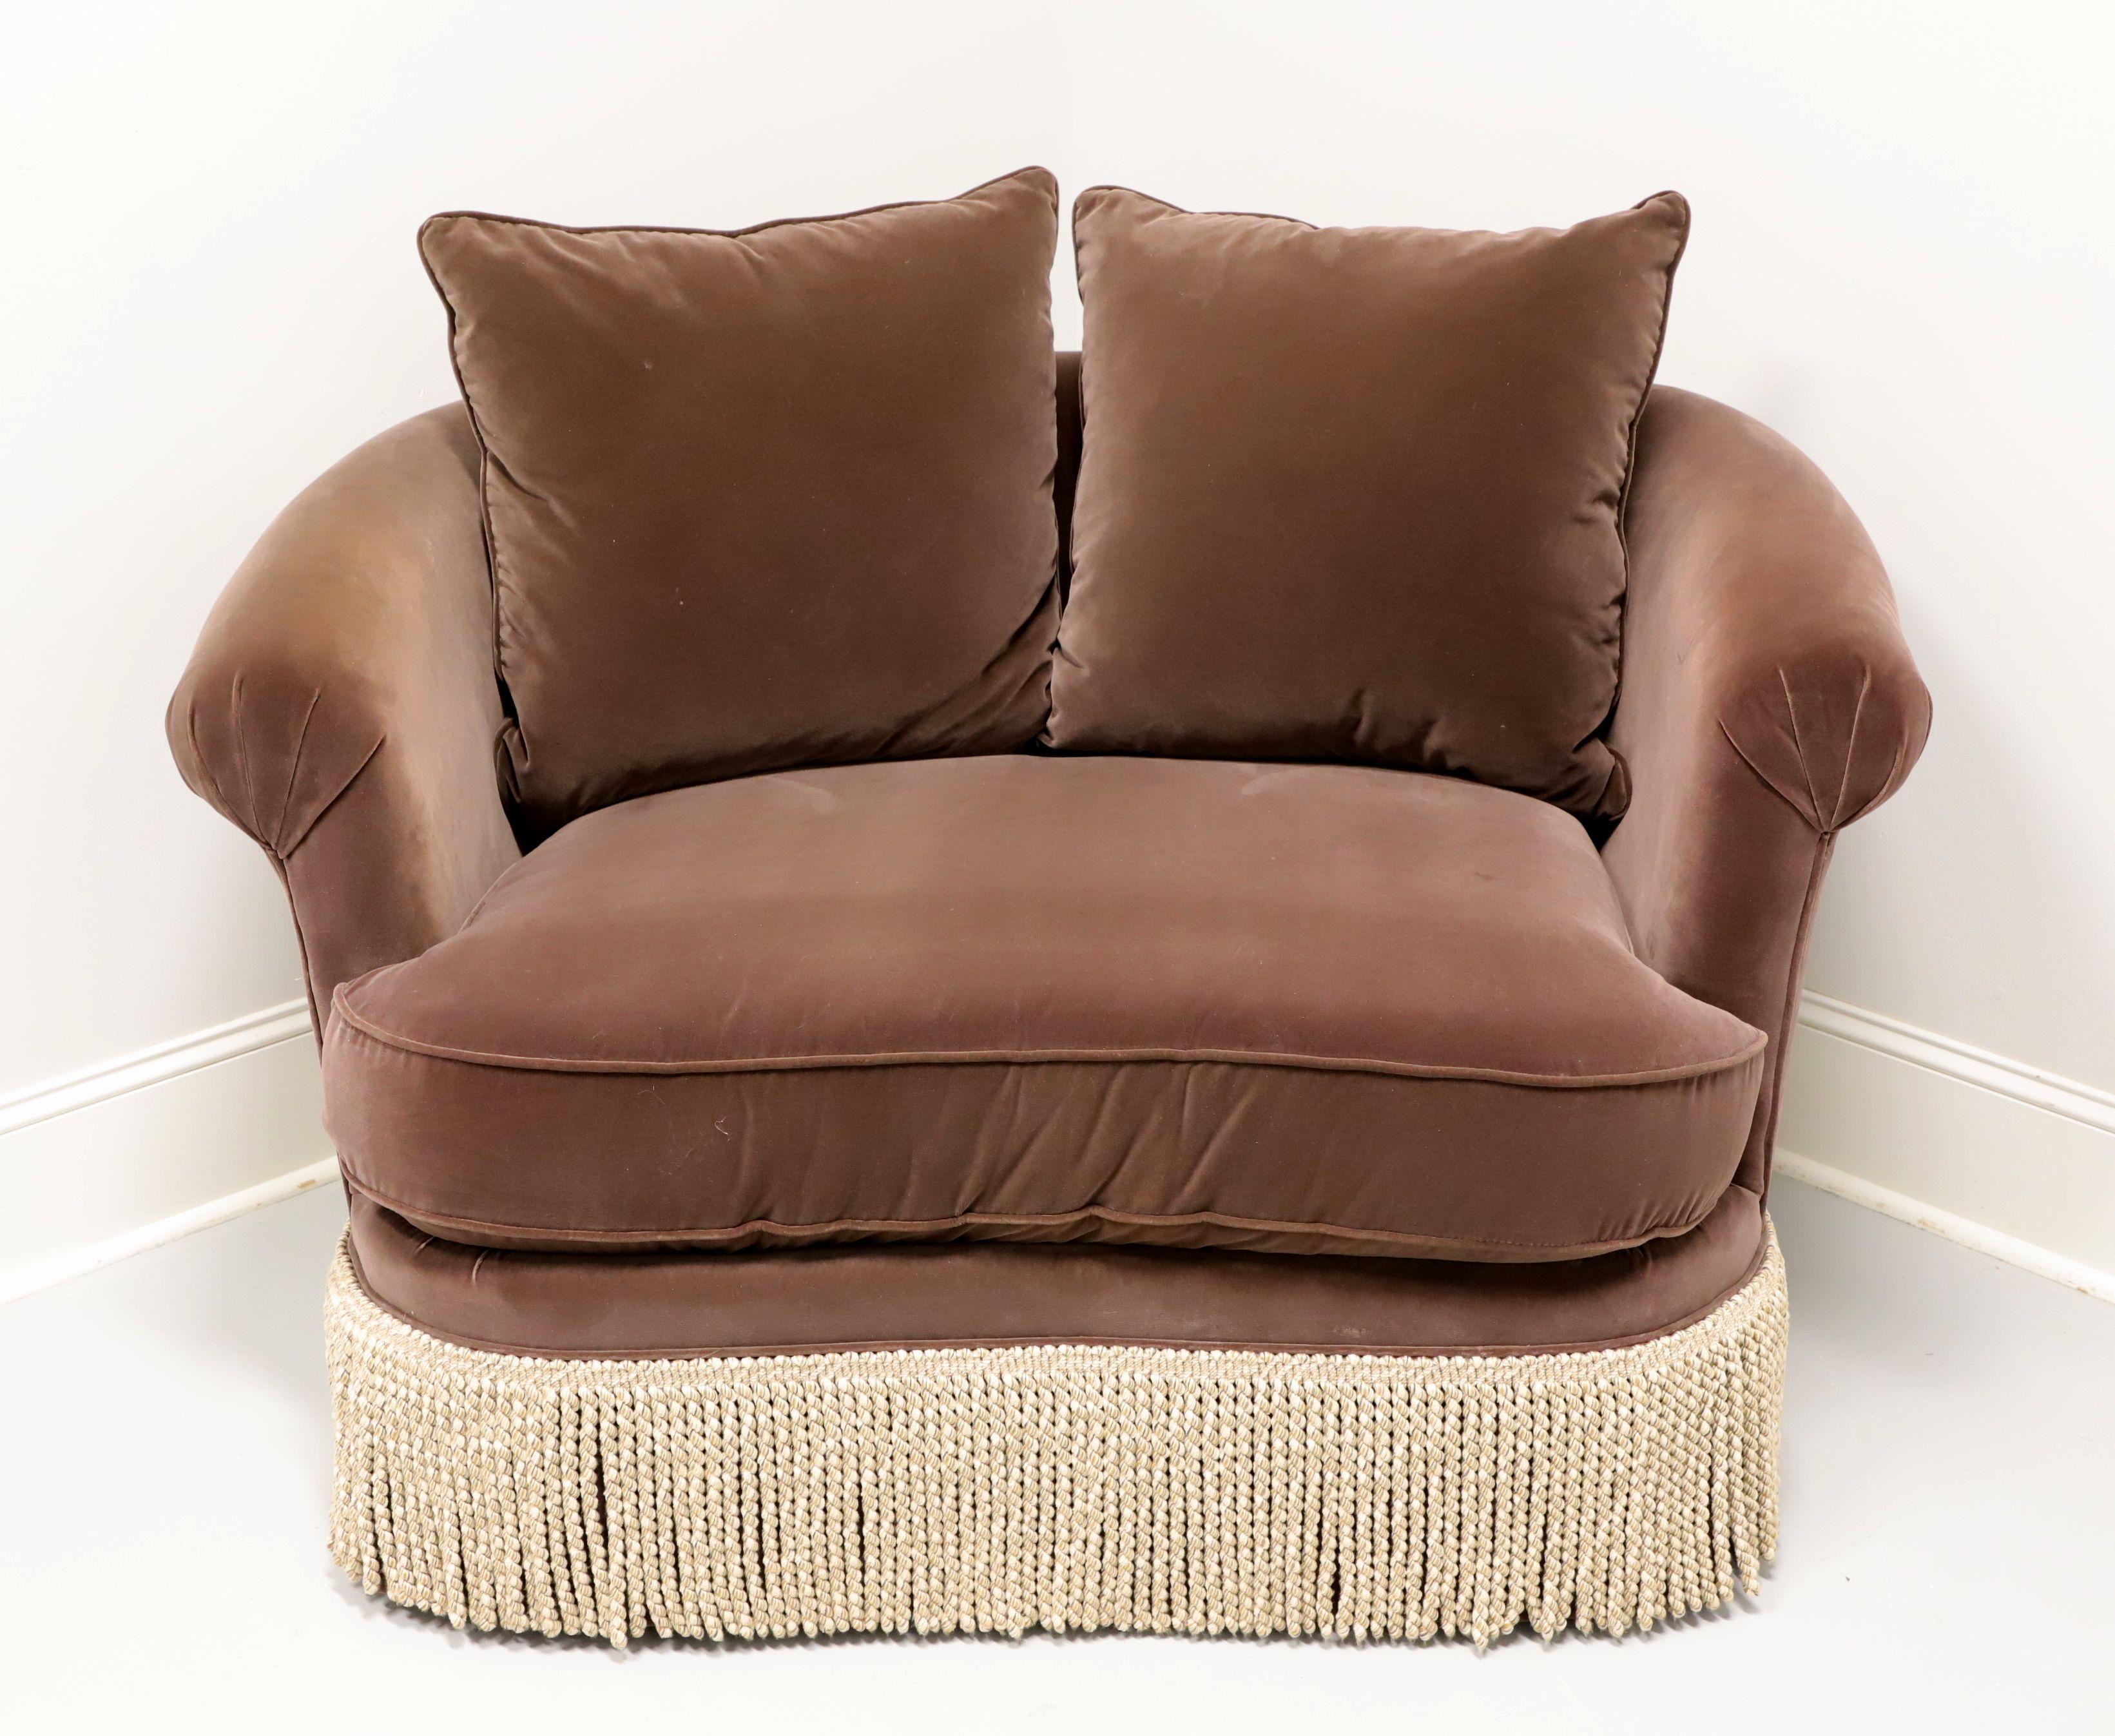 A Contemporary style swivel chair-and-a-half by Taylor King. Solid wood frame, oversized, fully upholstered in a soft velvety brown color fabric, Dual removable back pillows, rolled arms, beige bullion fringe at bottom, and easily rotated on a